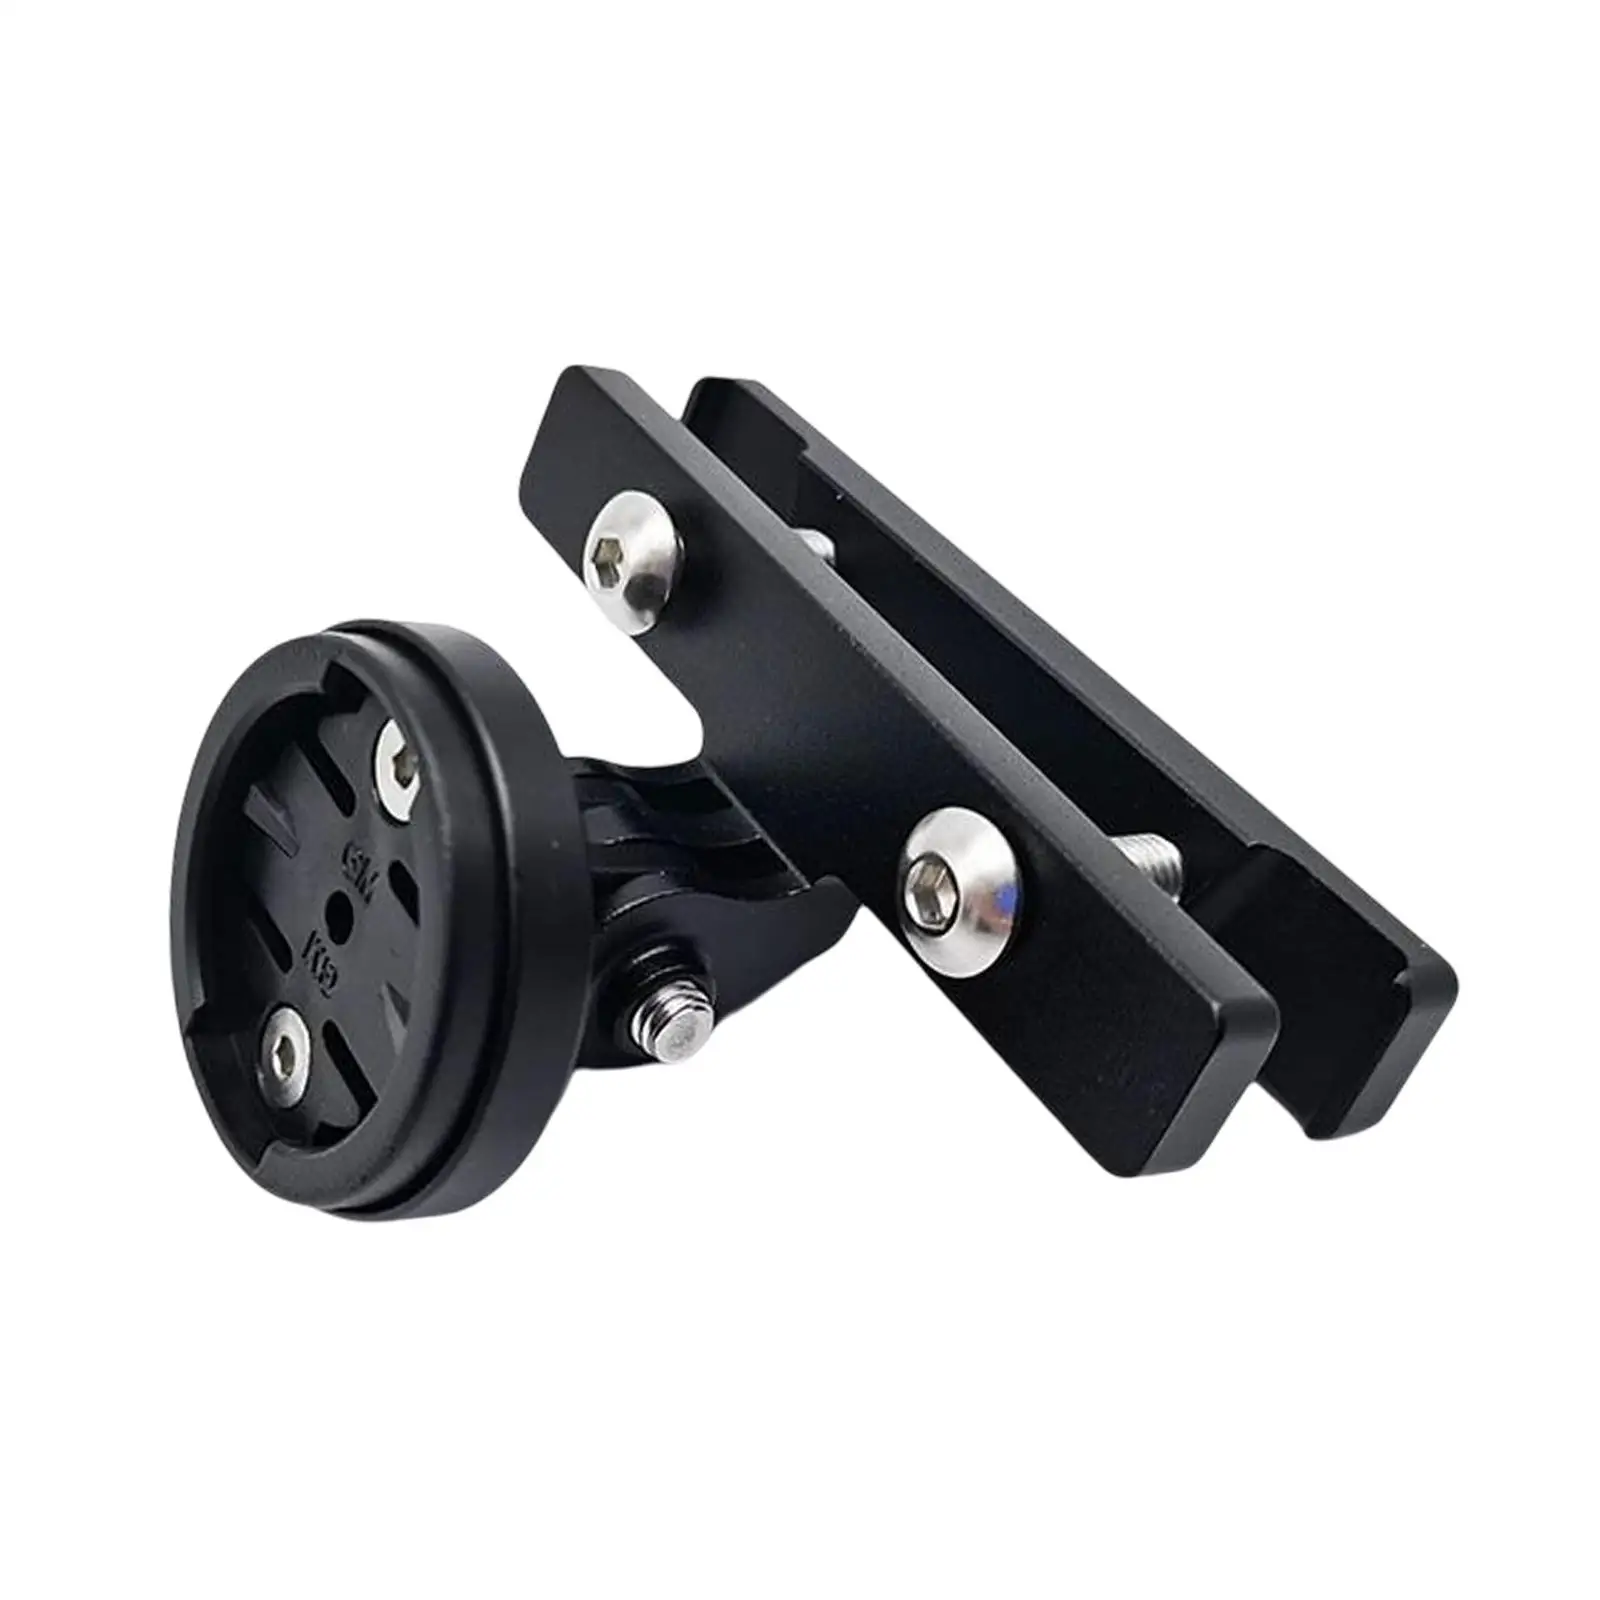 Universal bike Bracket Seatpost Mount Cycling Accessories bike Saddle Support Adapter Outdoor Sports